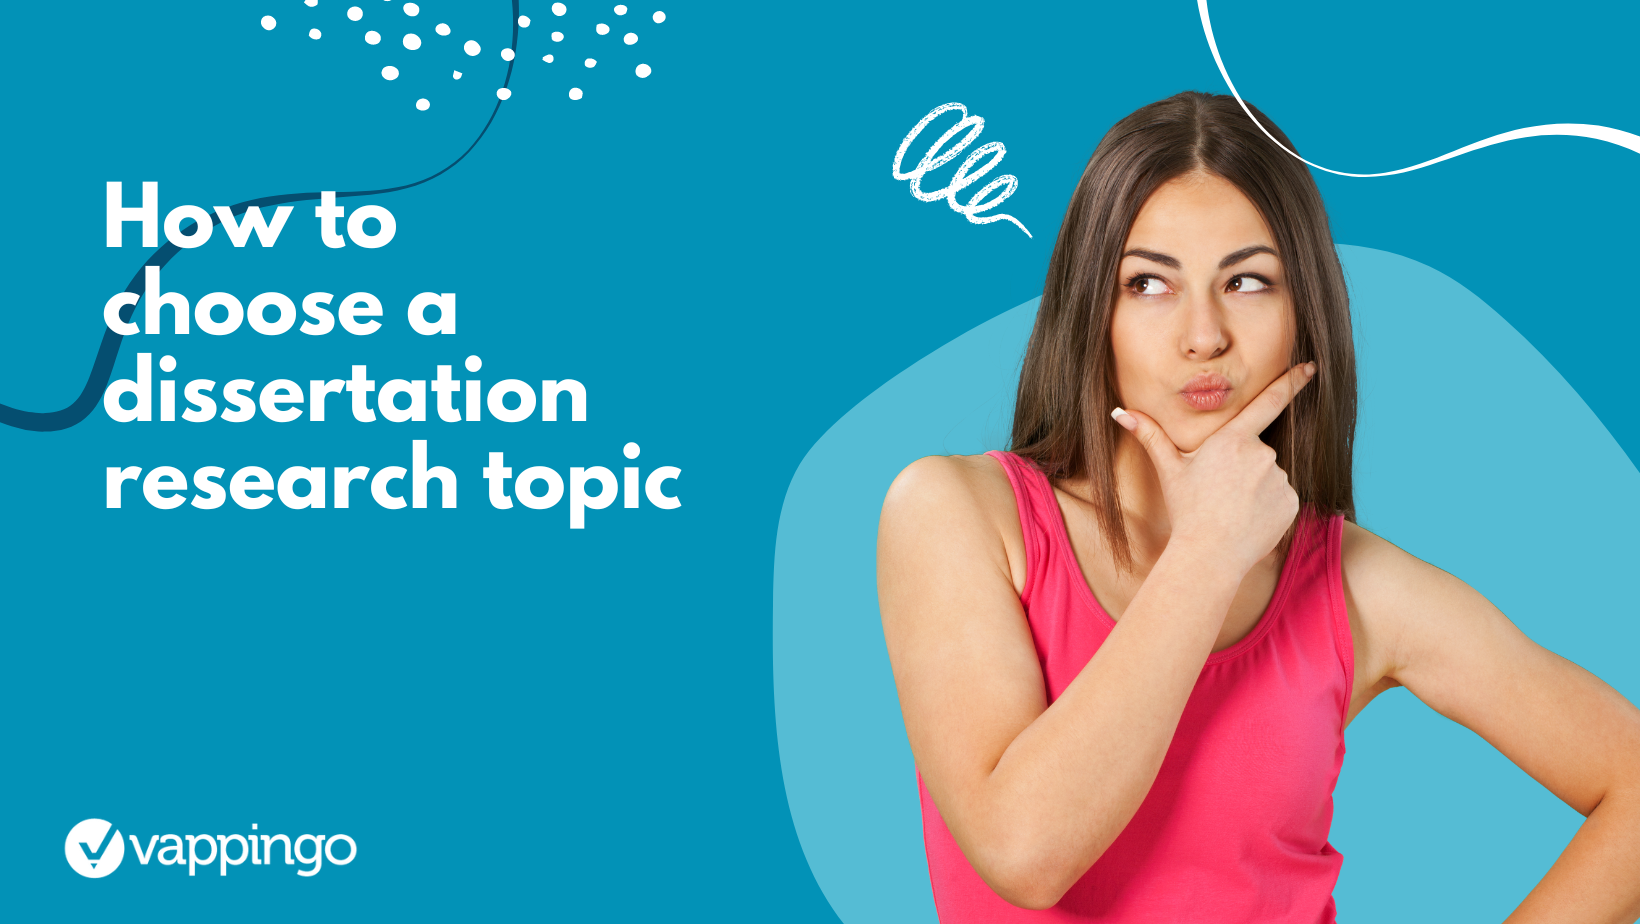 Image reads: How to choose a dissertation research topic